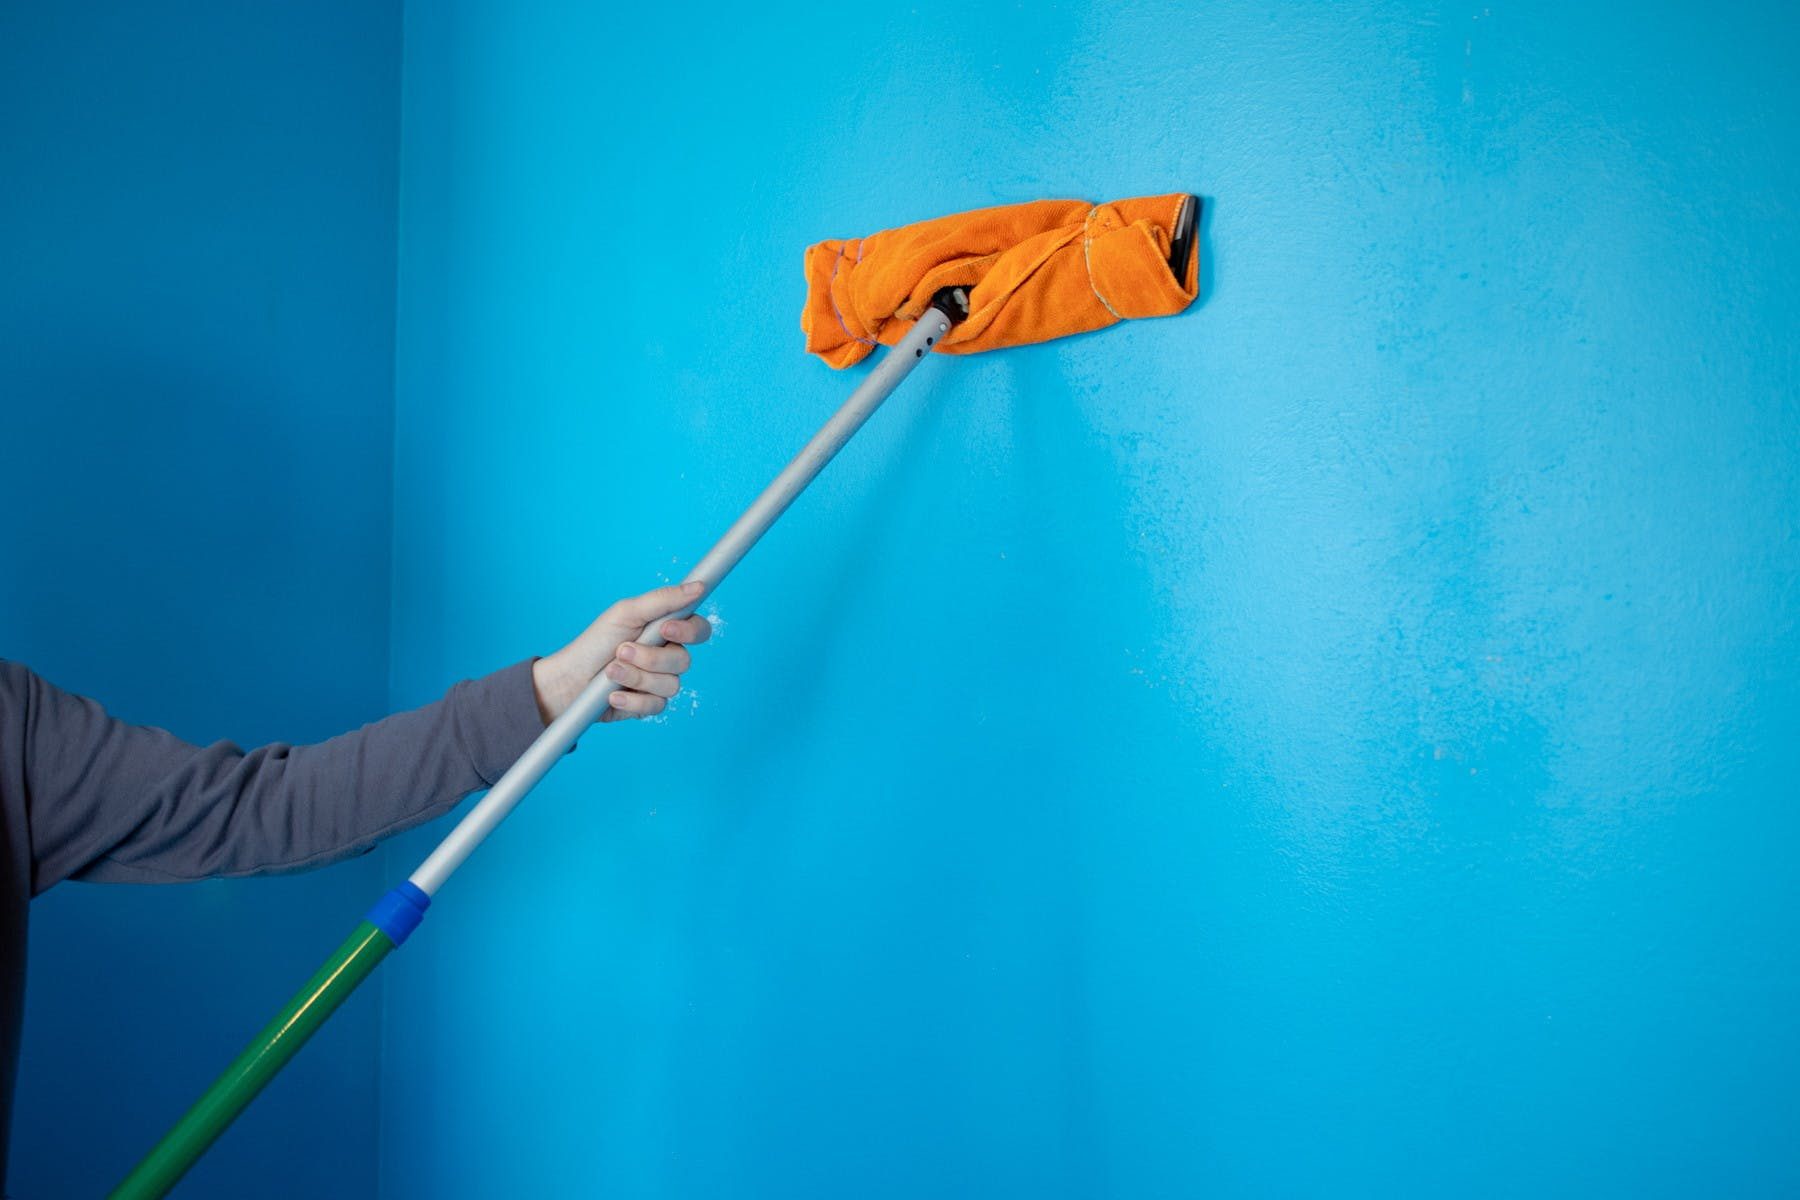 20190316-kcl-paint-tips-clean-walls-with-cloth-on-pushbroom-0302-1554750902-3149761